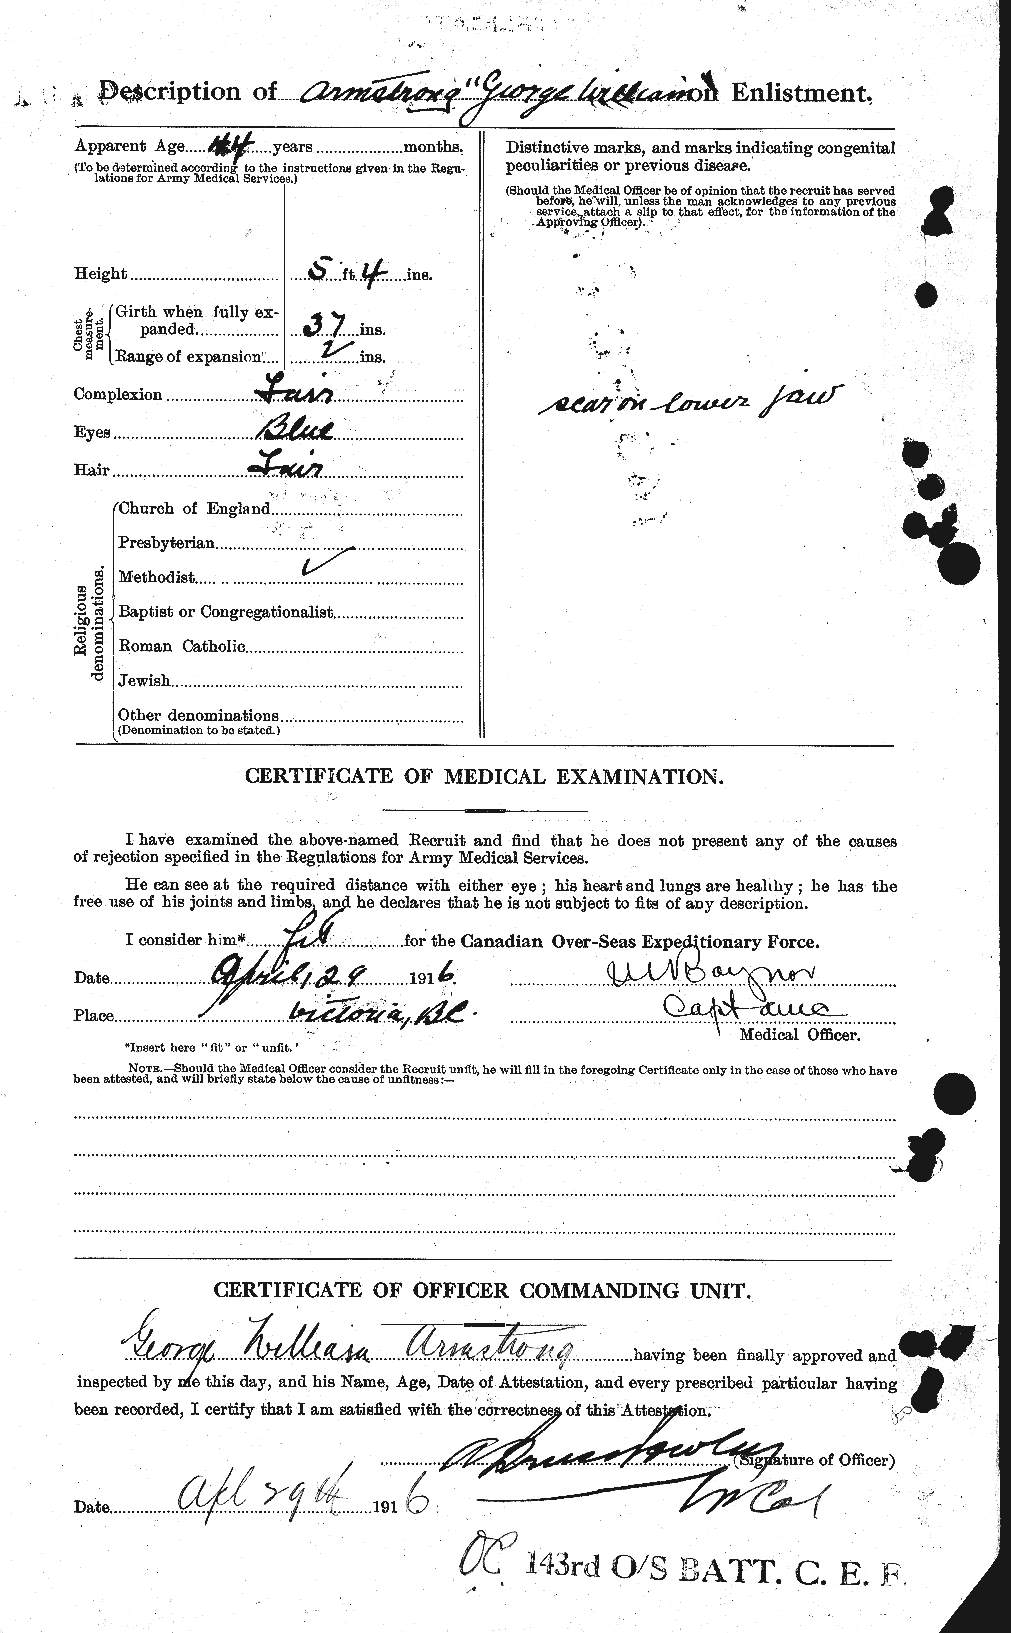 Personnel Records of the First World War - CEF 213703b